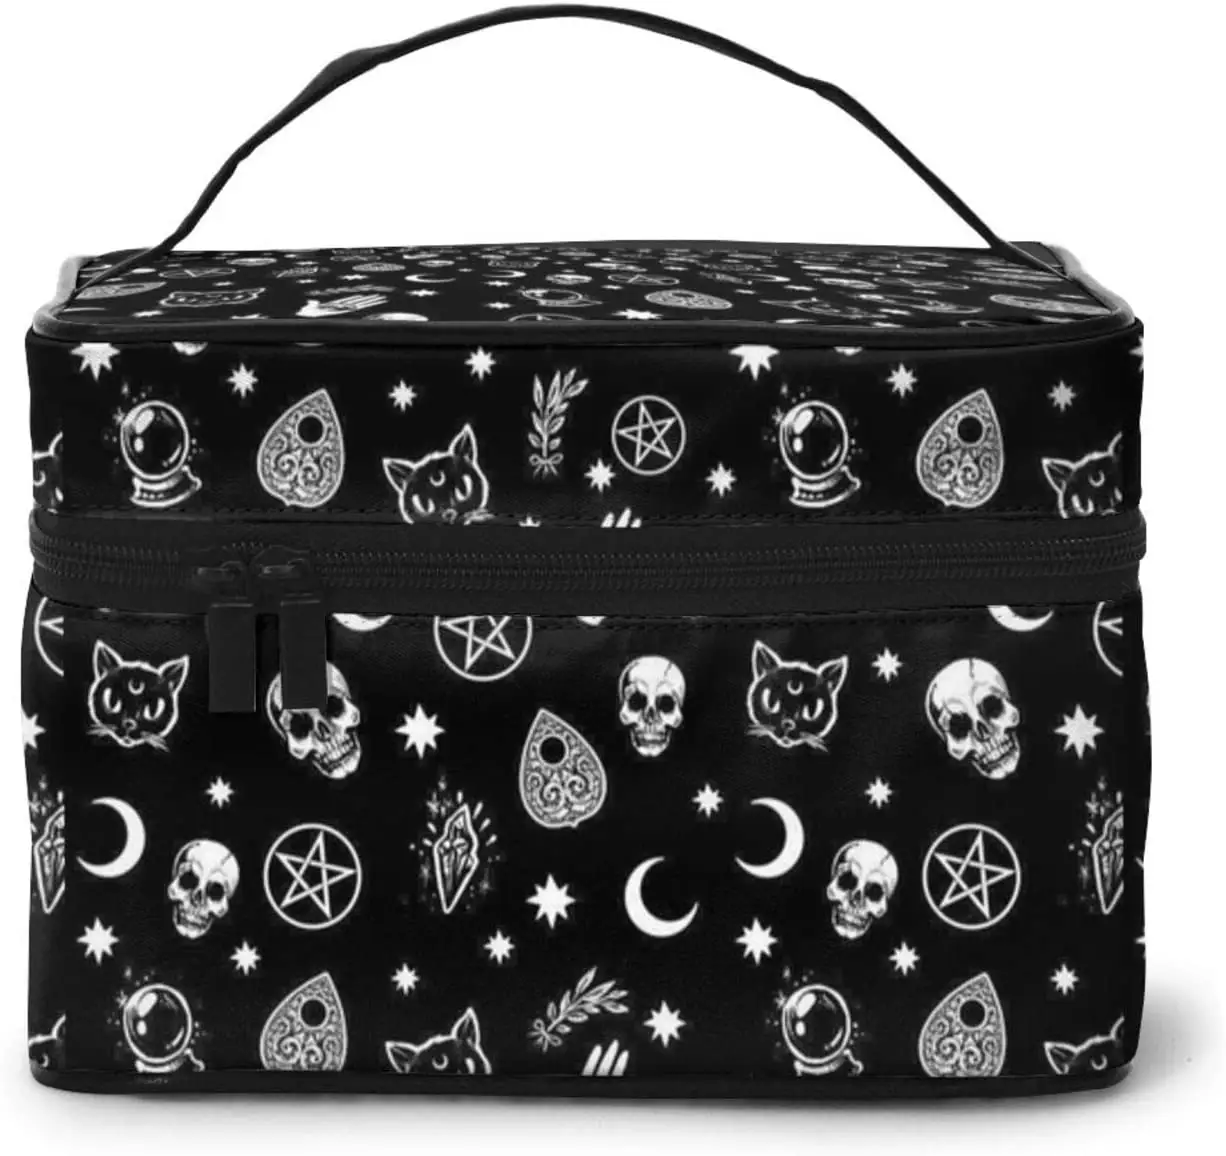 

Moon Gothic Pattern Travel Makeup Bag for Women Portable Train Cosmetic Case with Handle Organizer Artist Storage Toiletry Bags